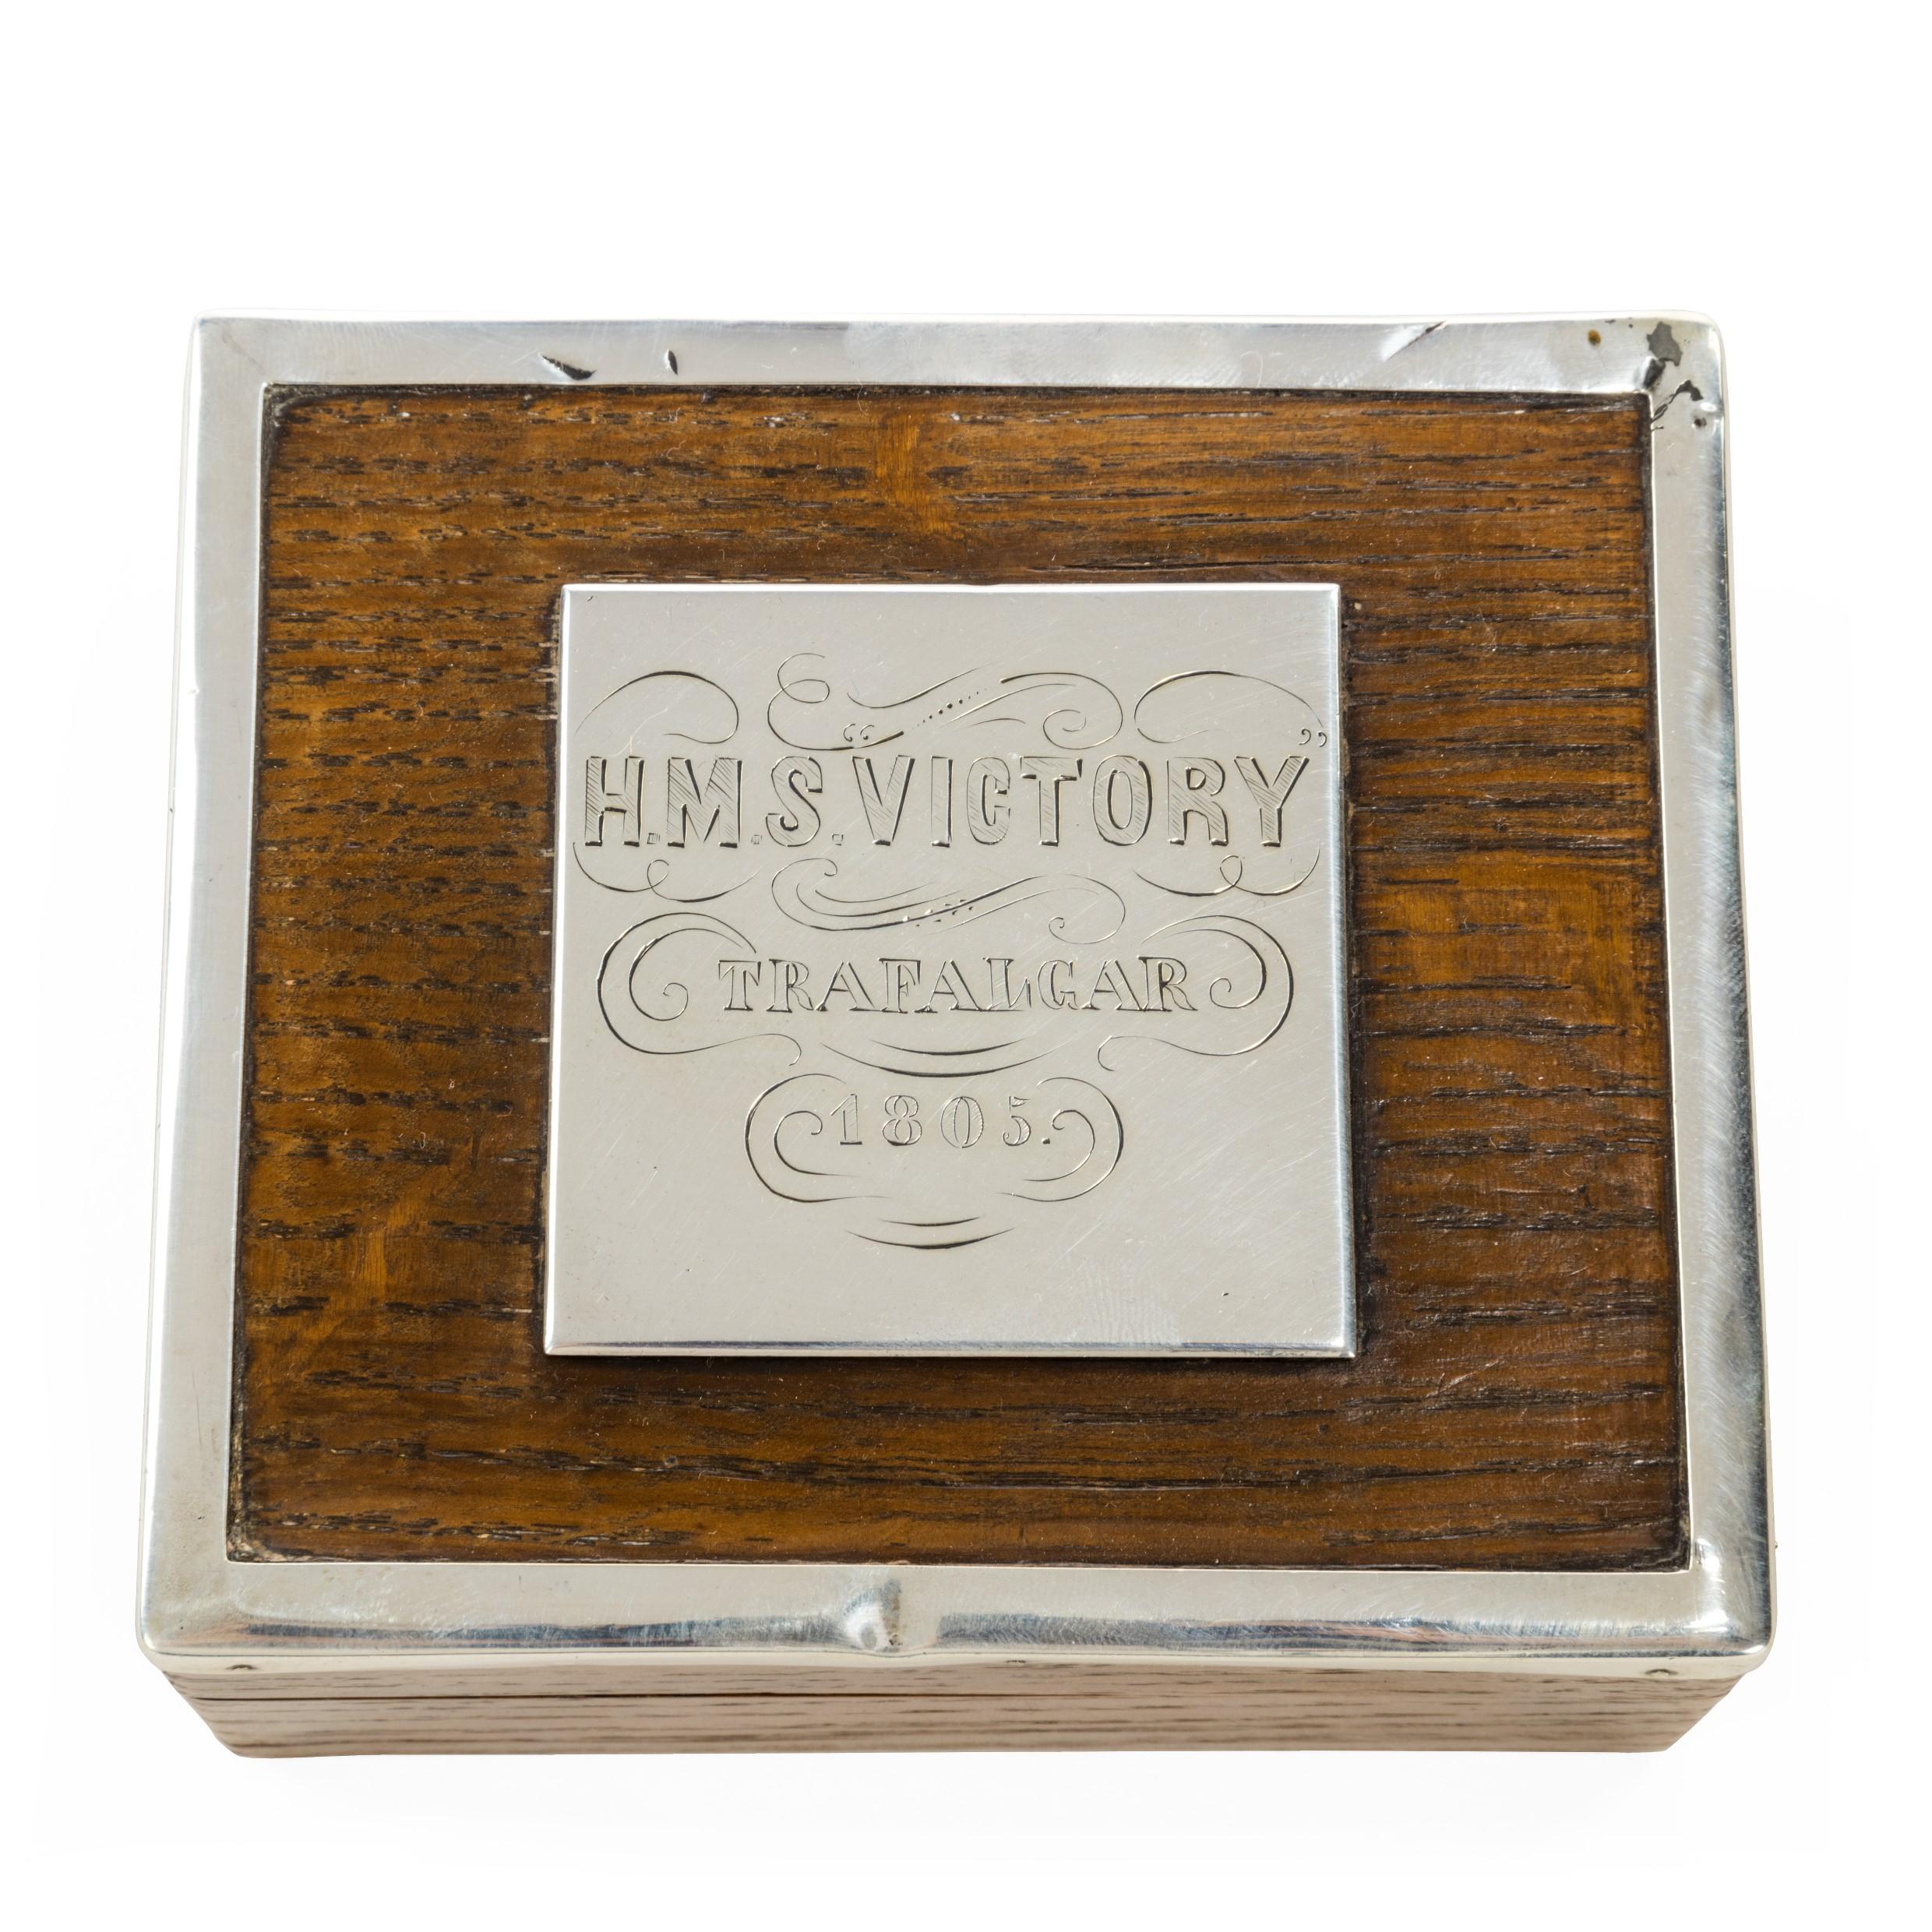 A silver mounted commemorative box made from ‘Victory’ oak, the hinged lid bearing a silver plaque on the outside stating ‘HMS Victory, Trafalgar, 1805’ and another on the inside reading ‘J.E.B. Gordon Highlanders from G.T.H.B. HMS Alexandra, Malta